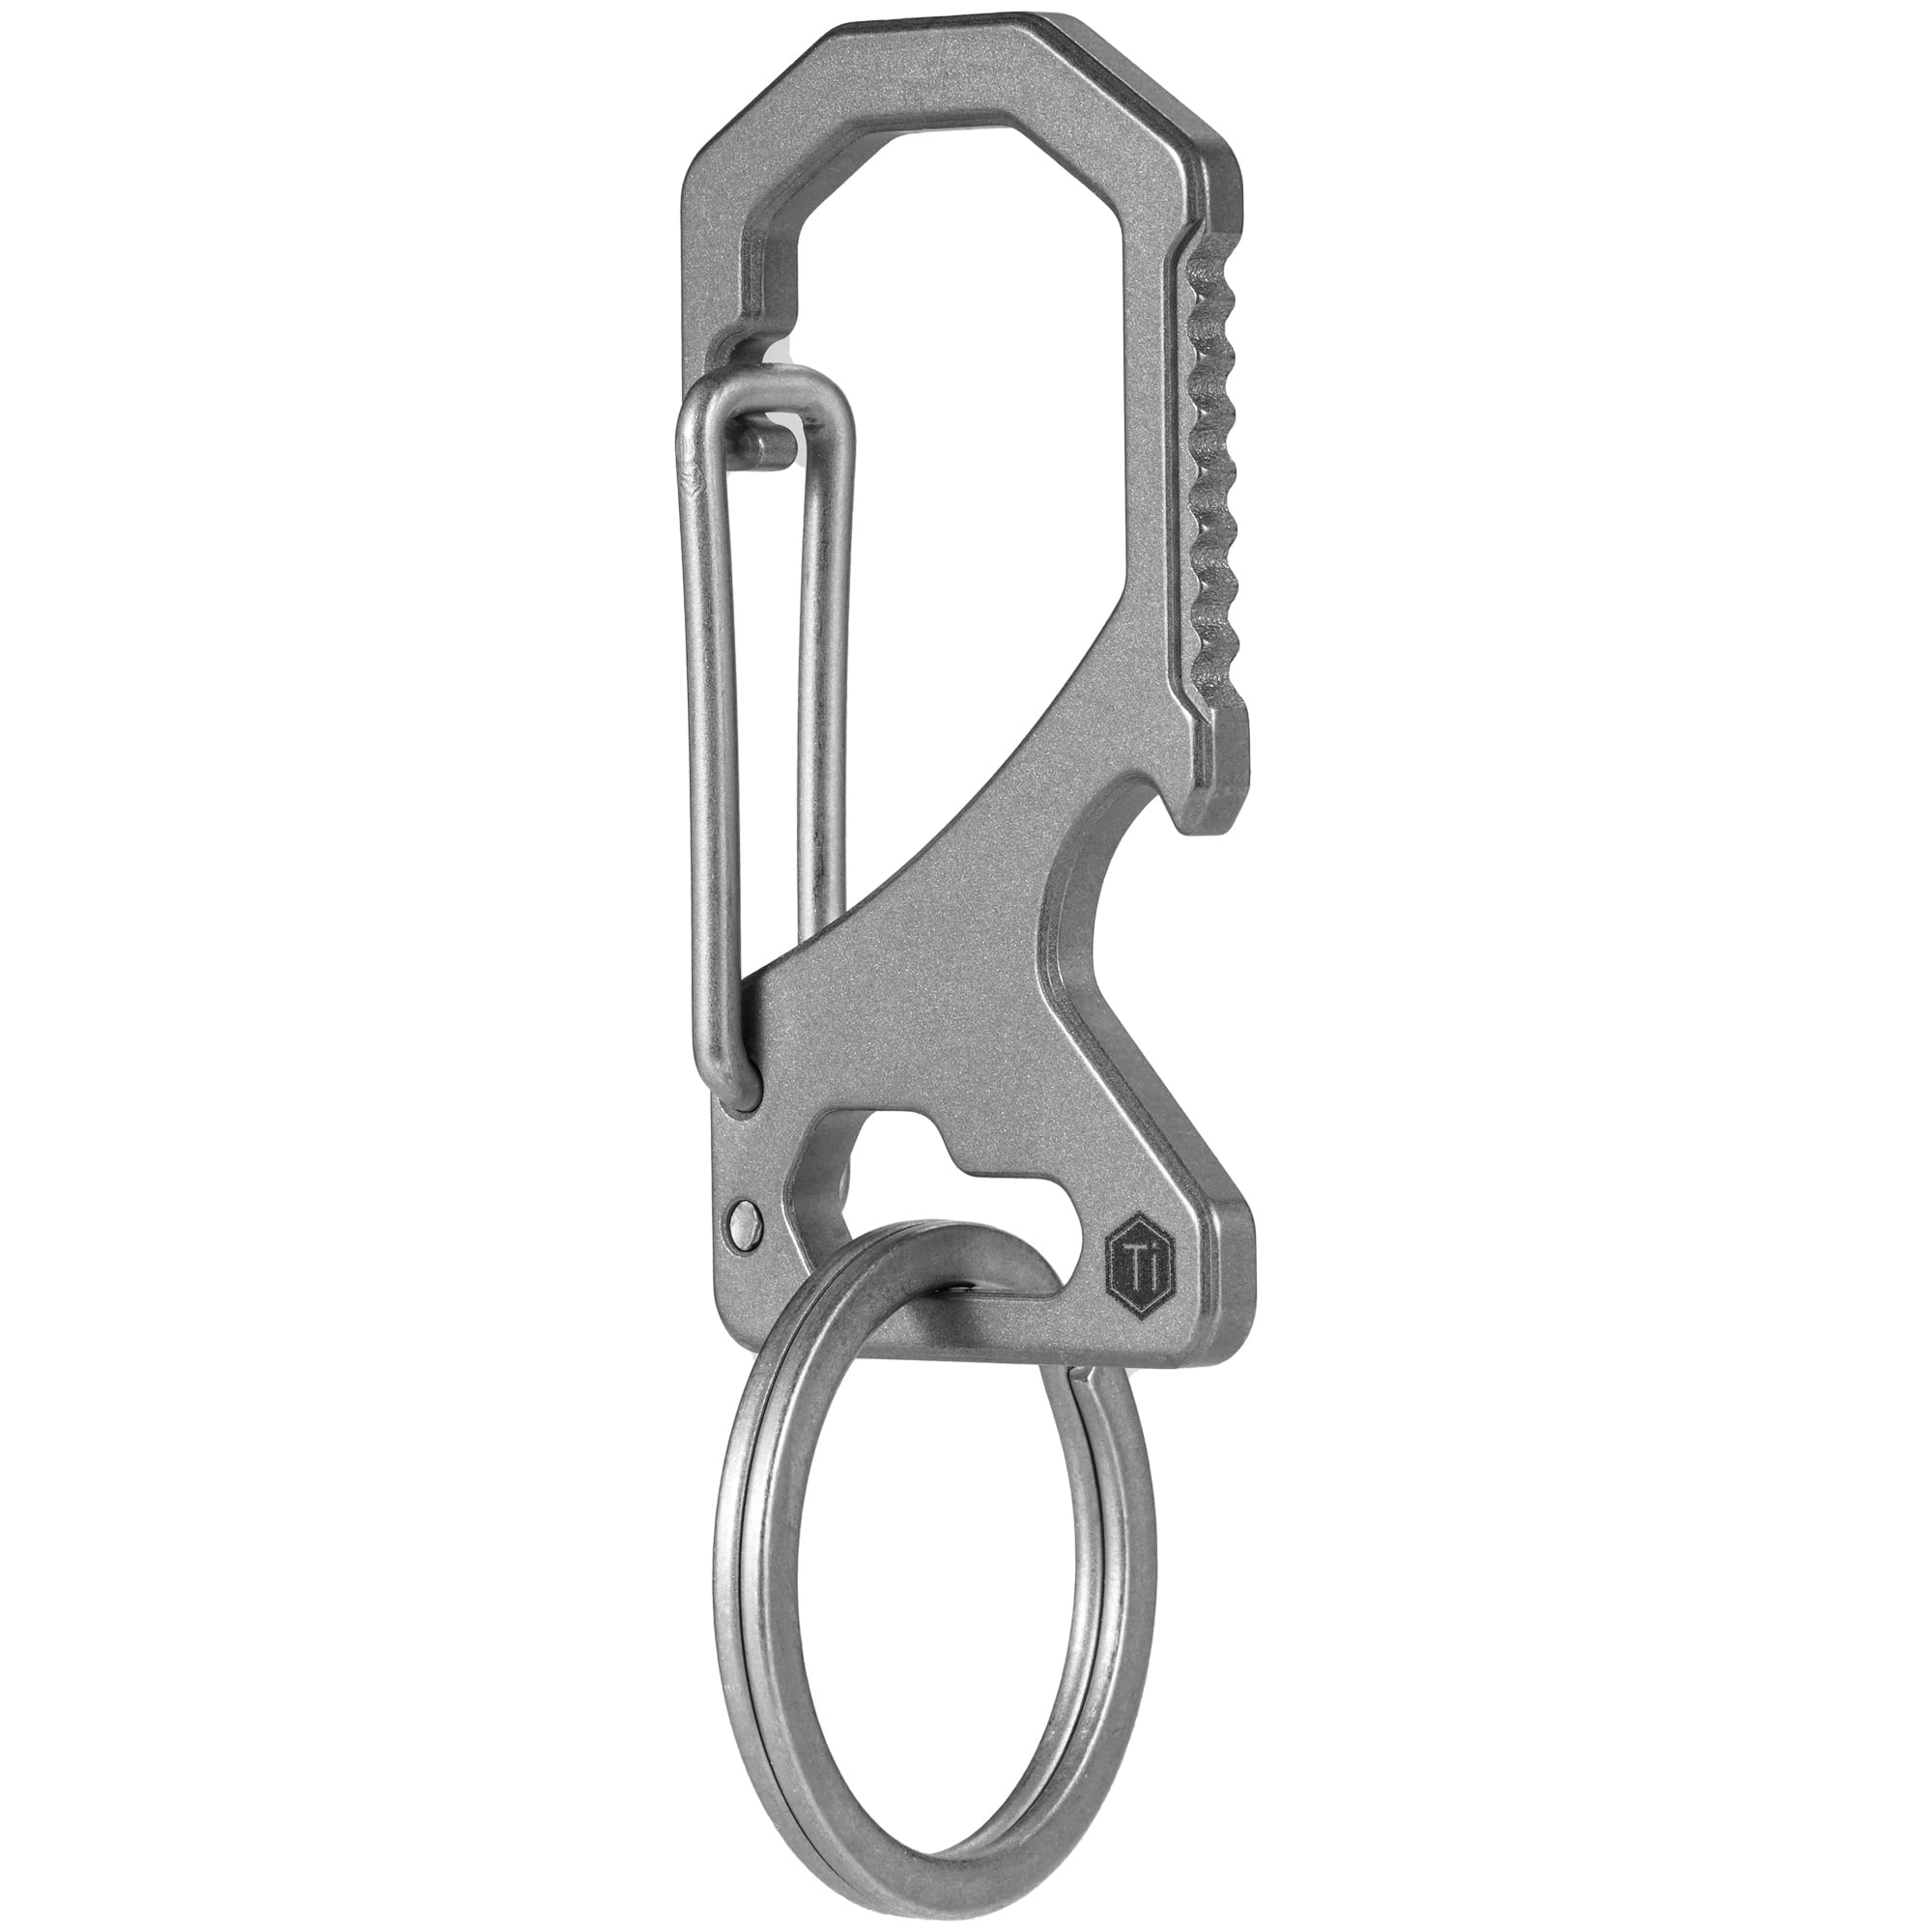  TISUR Titanium Carabiner Keychain Clip,D Key Rings for  Keychains,Quick Release Keychain,Key Chain Clip for Men Women (Black) :  Sports & Outdoors